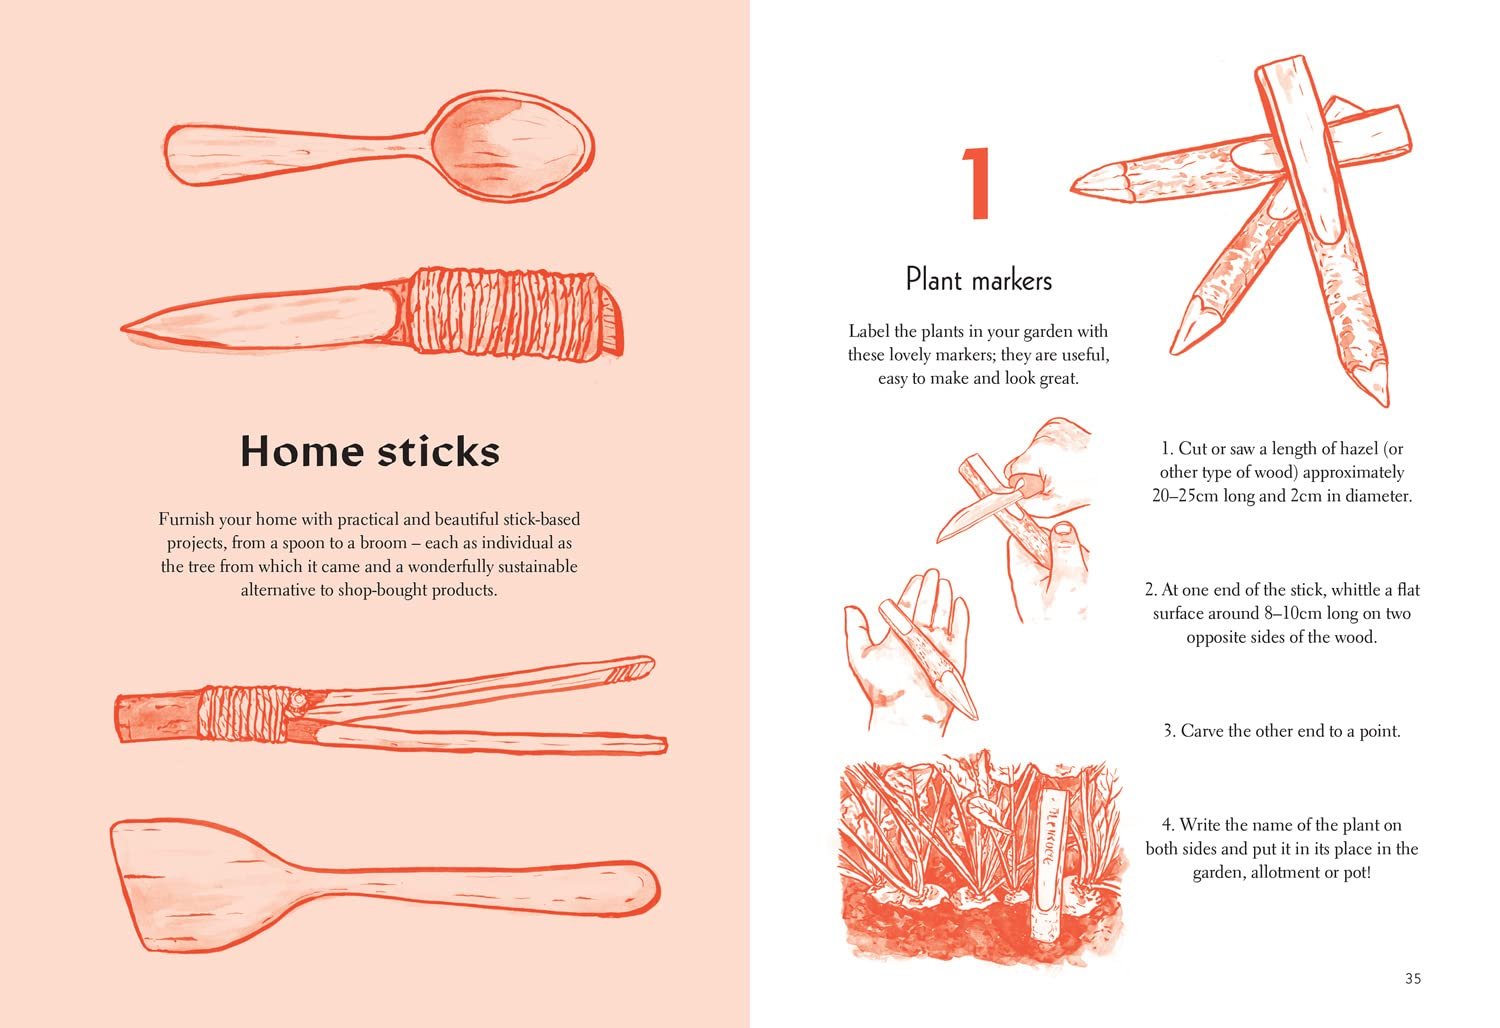 50 Things to do with a Stick Maria Nilsson Illustration.jpeg